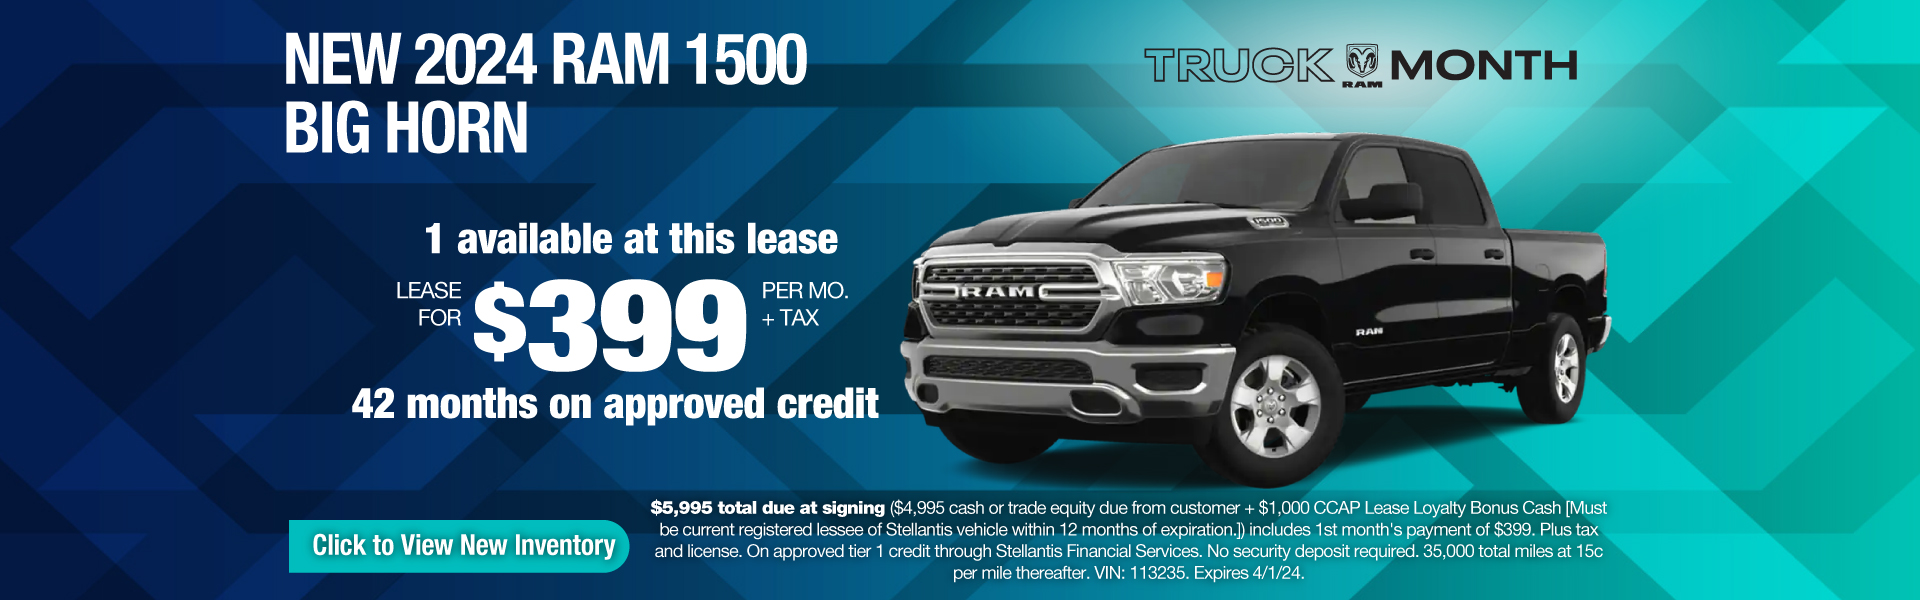 Lease a New 2024 RAM 1500 Big Horn for $399 per month plus tax! Expires 4/1/24.